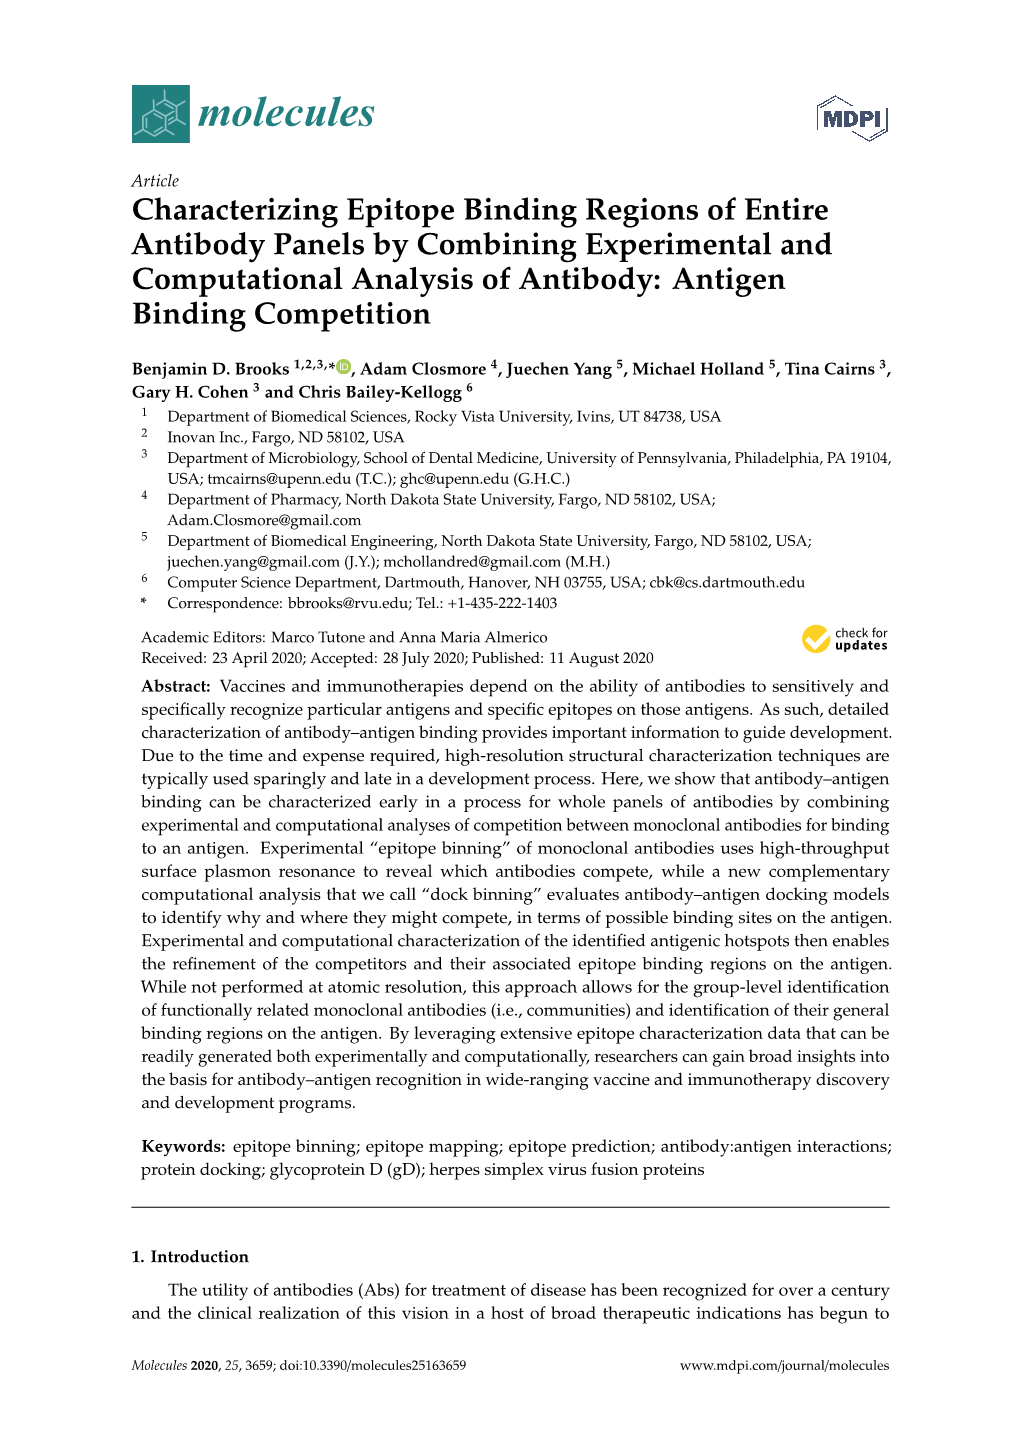 Characterizing Epitope Binding Regions of Entire Antibody Panels by Combining Experimental and Computational Analysis of Antibody: Antigen Binding Competition